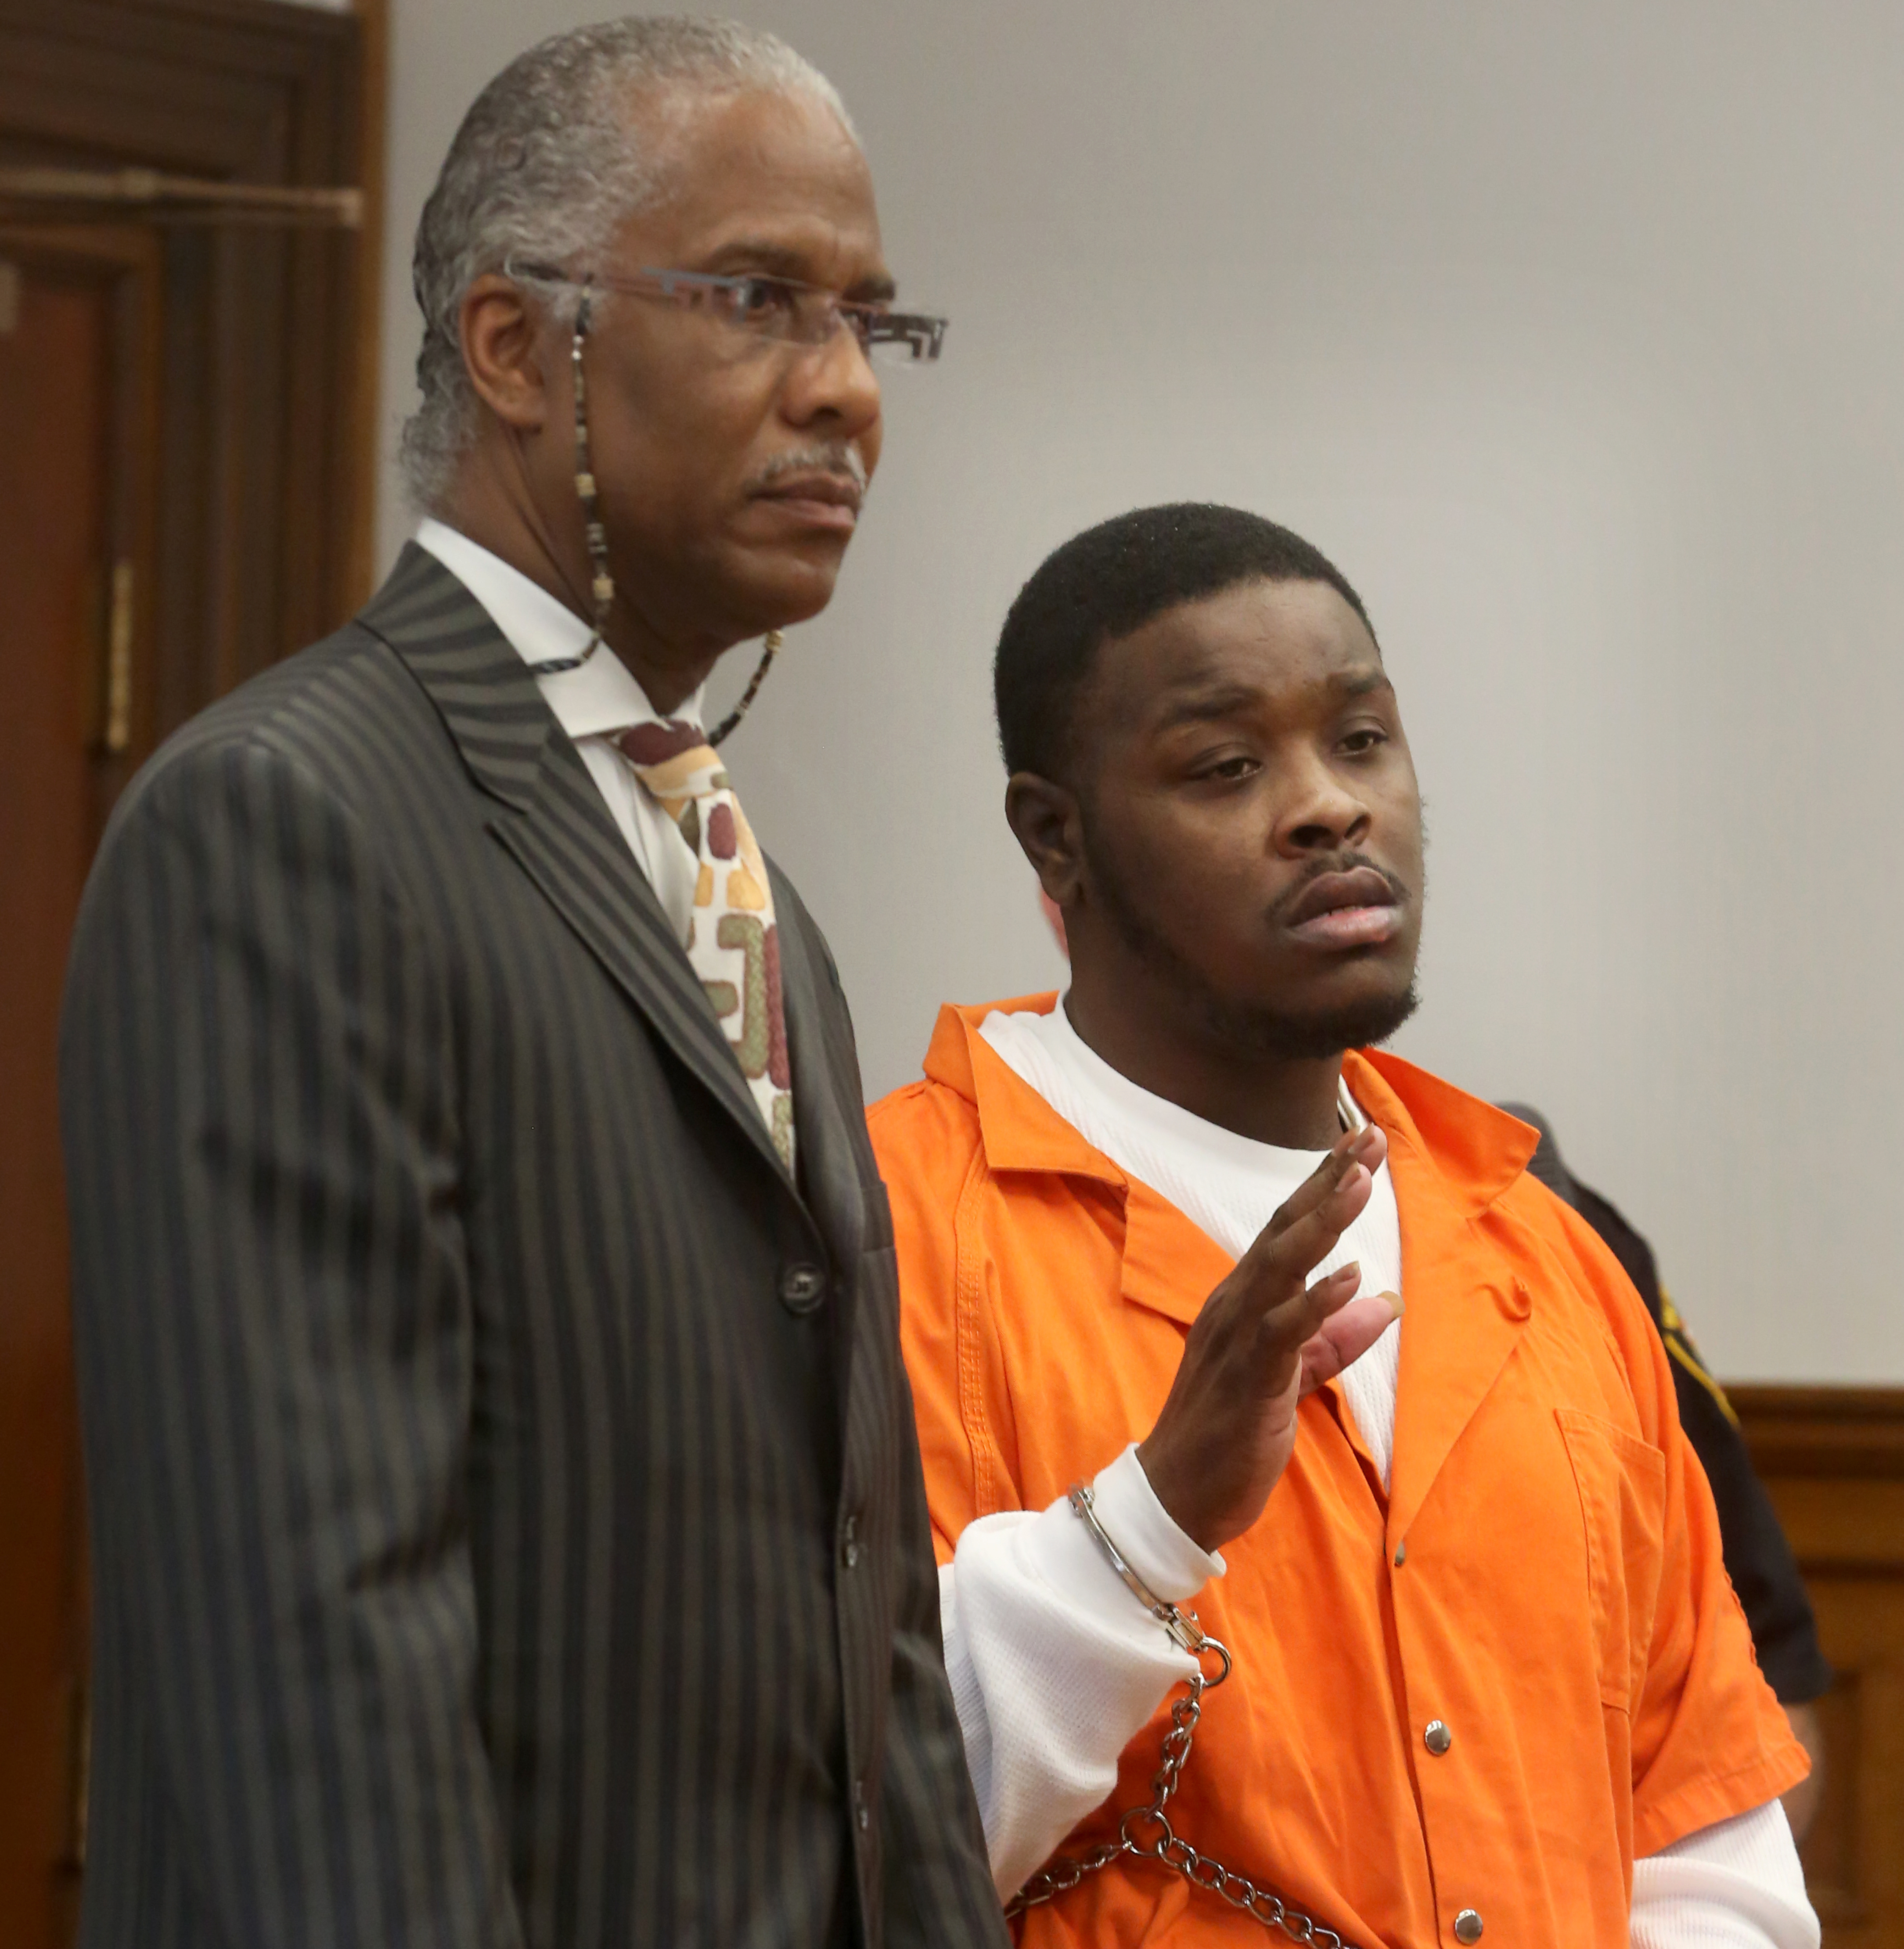 Toledoan Pleads Guilty To Reckless Homicide The Blade